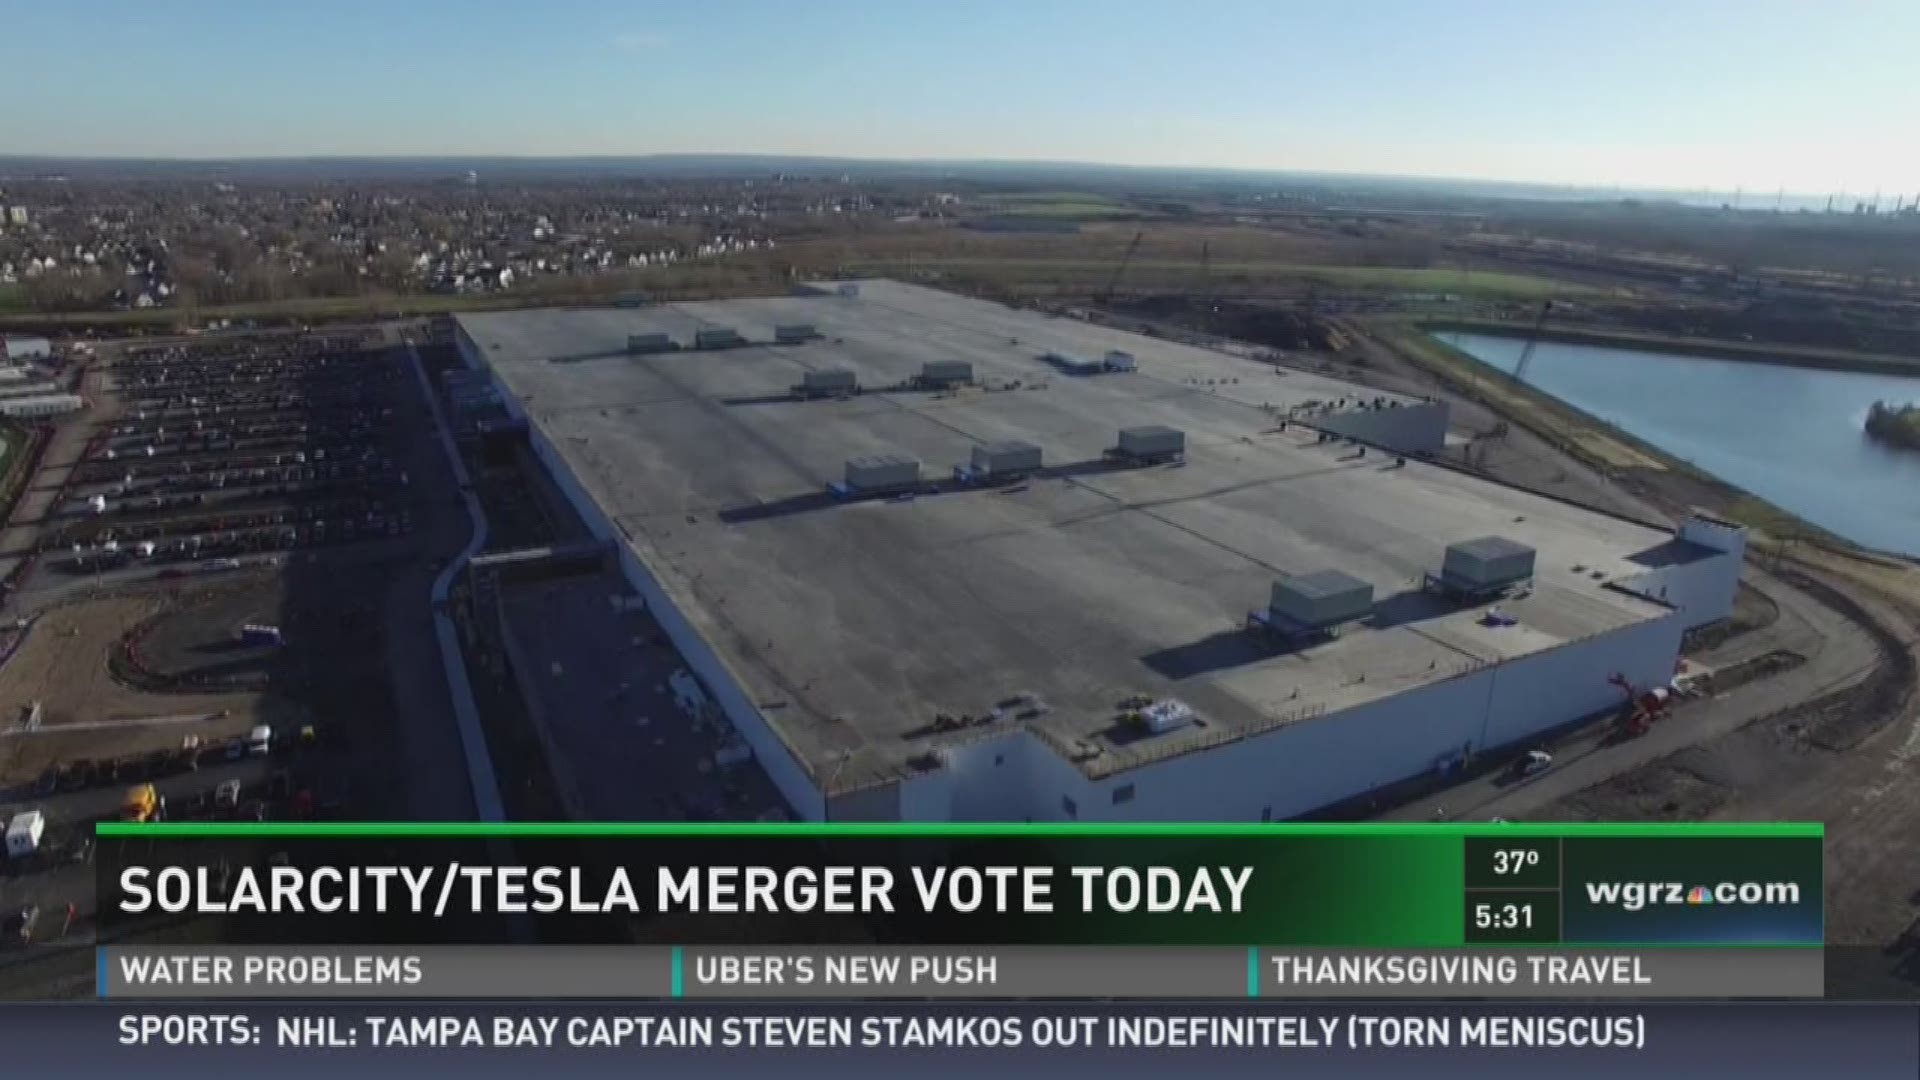 Daybreak's Pete Gallivan explains what a potential SolarCity and Tesla merger vote means for Western New York.